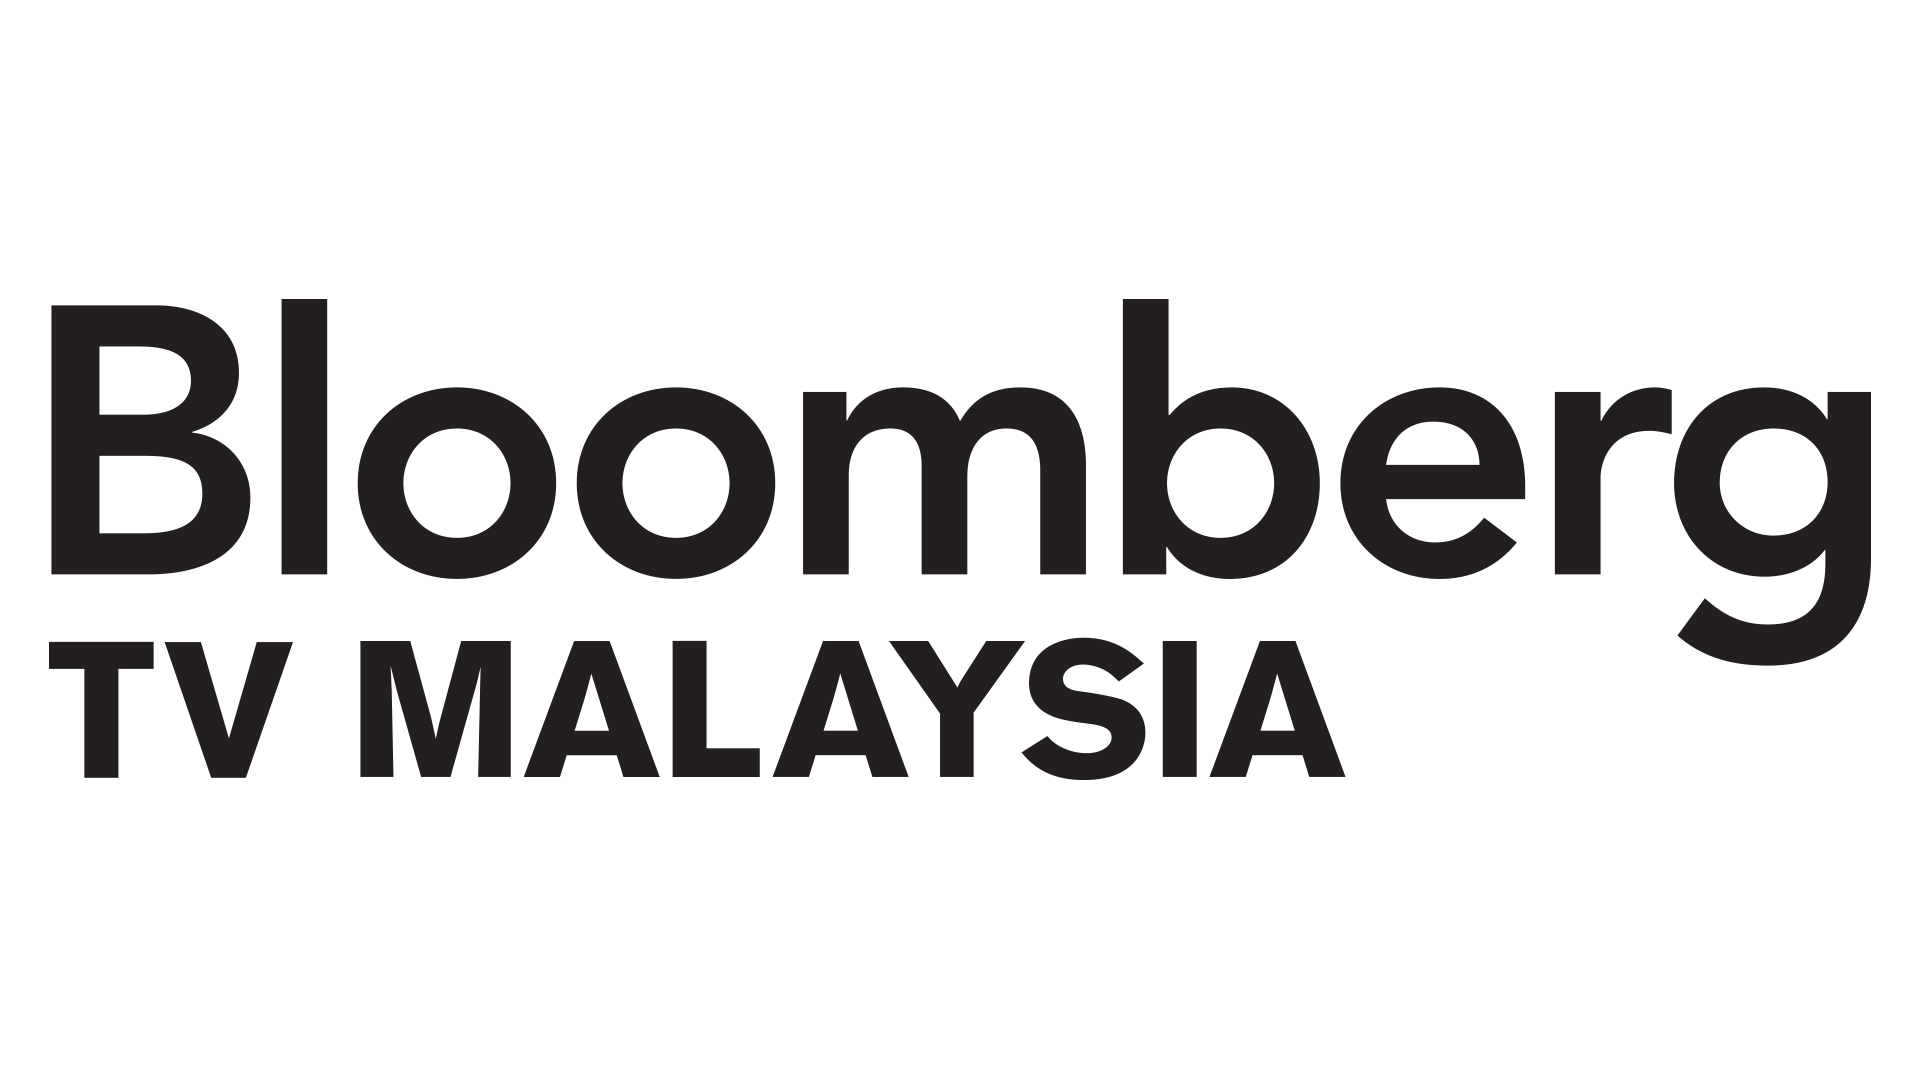 Bloomberg Logo - File:Bloomberg TY Malaysia Logo (Black).png - Wikimedia Commons